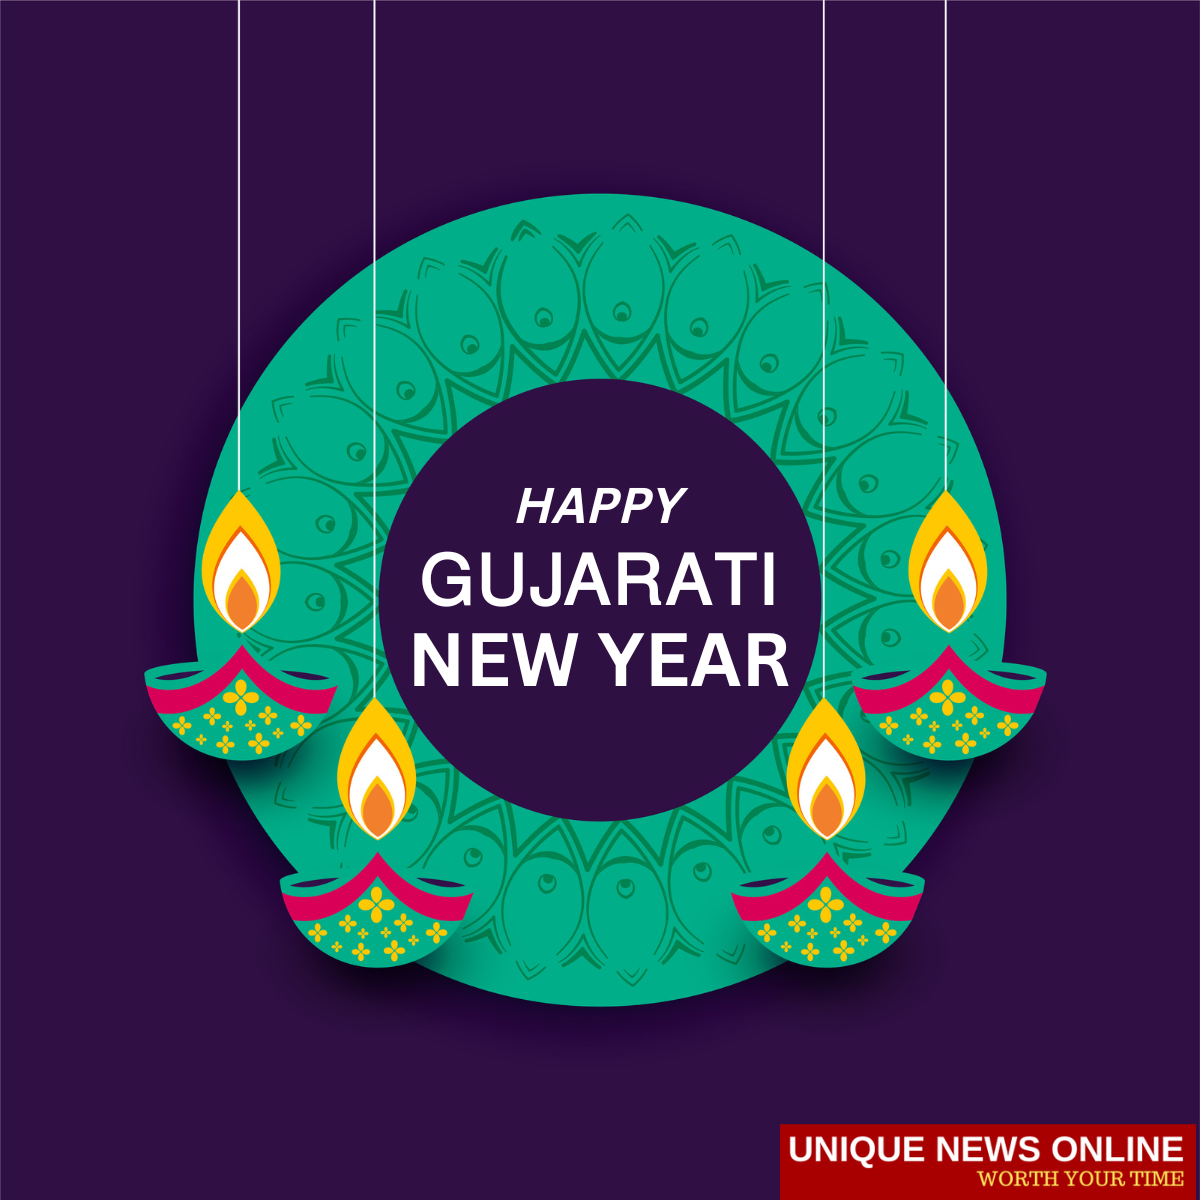 Gujarati New Year 2022: Best Wishes, Greetings, Quotes, HD Images, Messages, Pics, and Shayari To Share